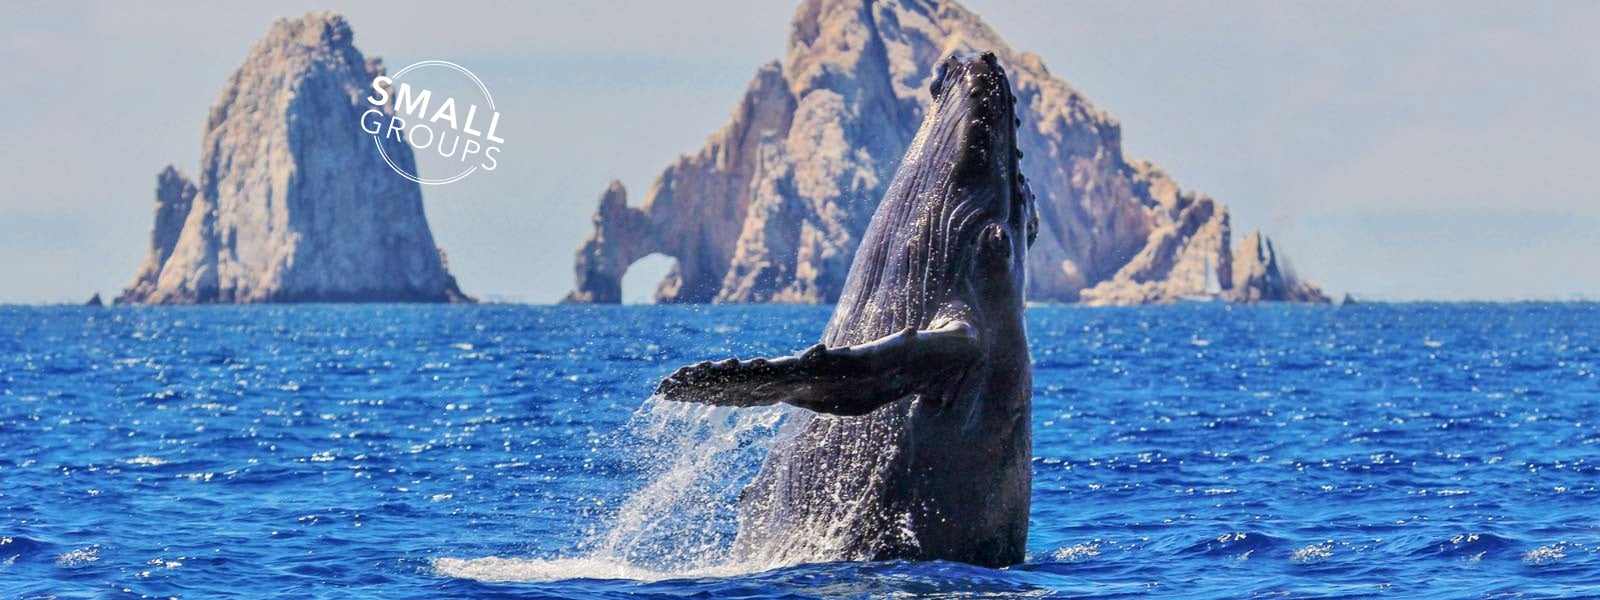 Humpback whales in cabo